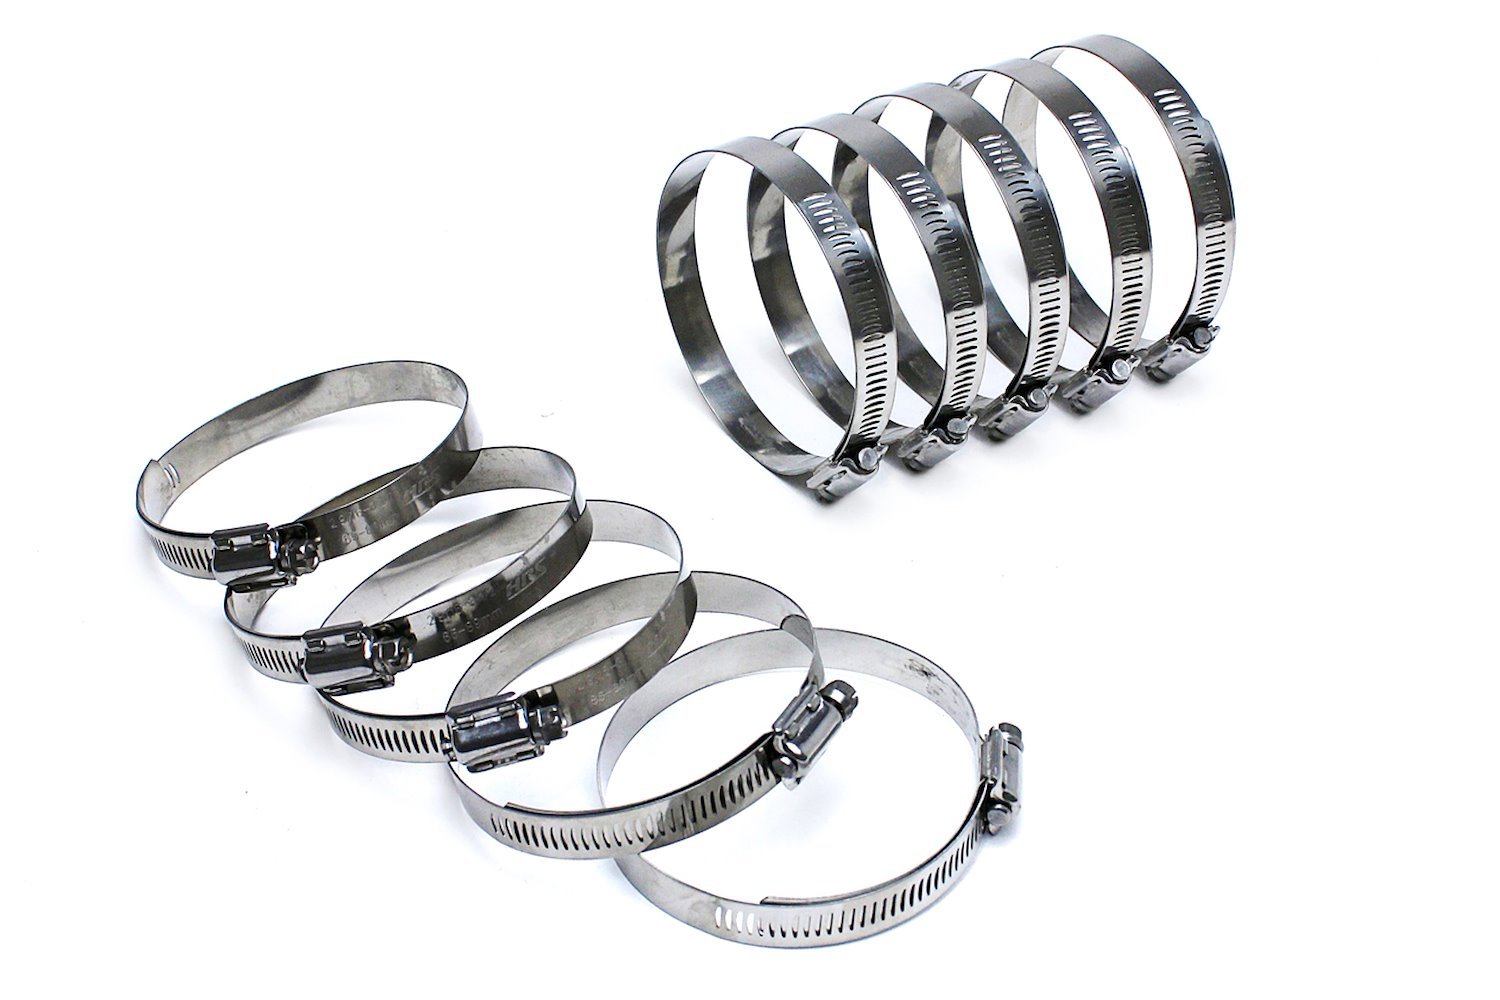 SSWC-52-76x10 Stainless Steel Worm Gear Hose Clamp, Effective Range: 2-1/16 in.- 3 in., 10Pc